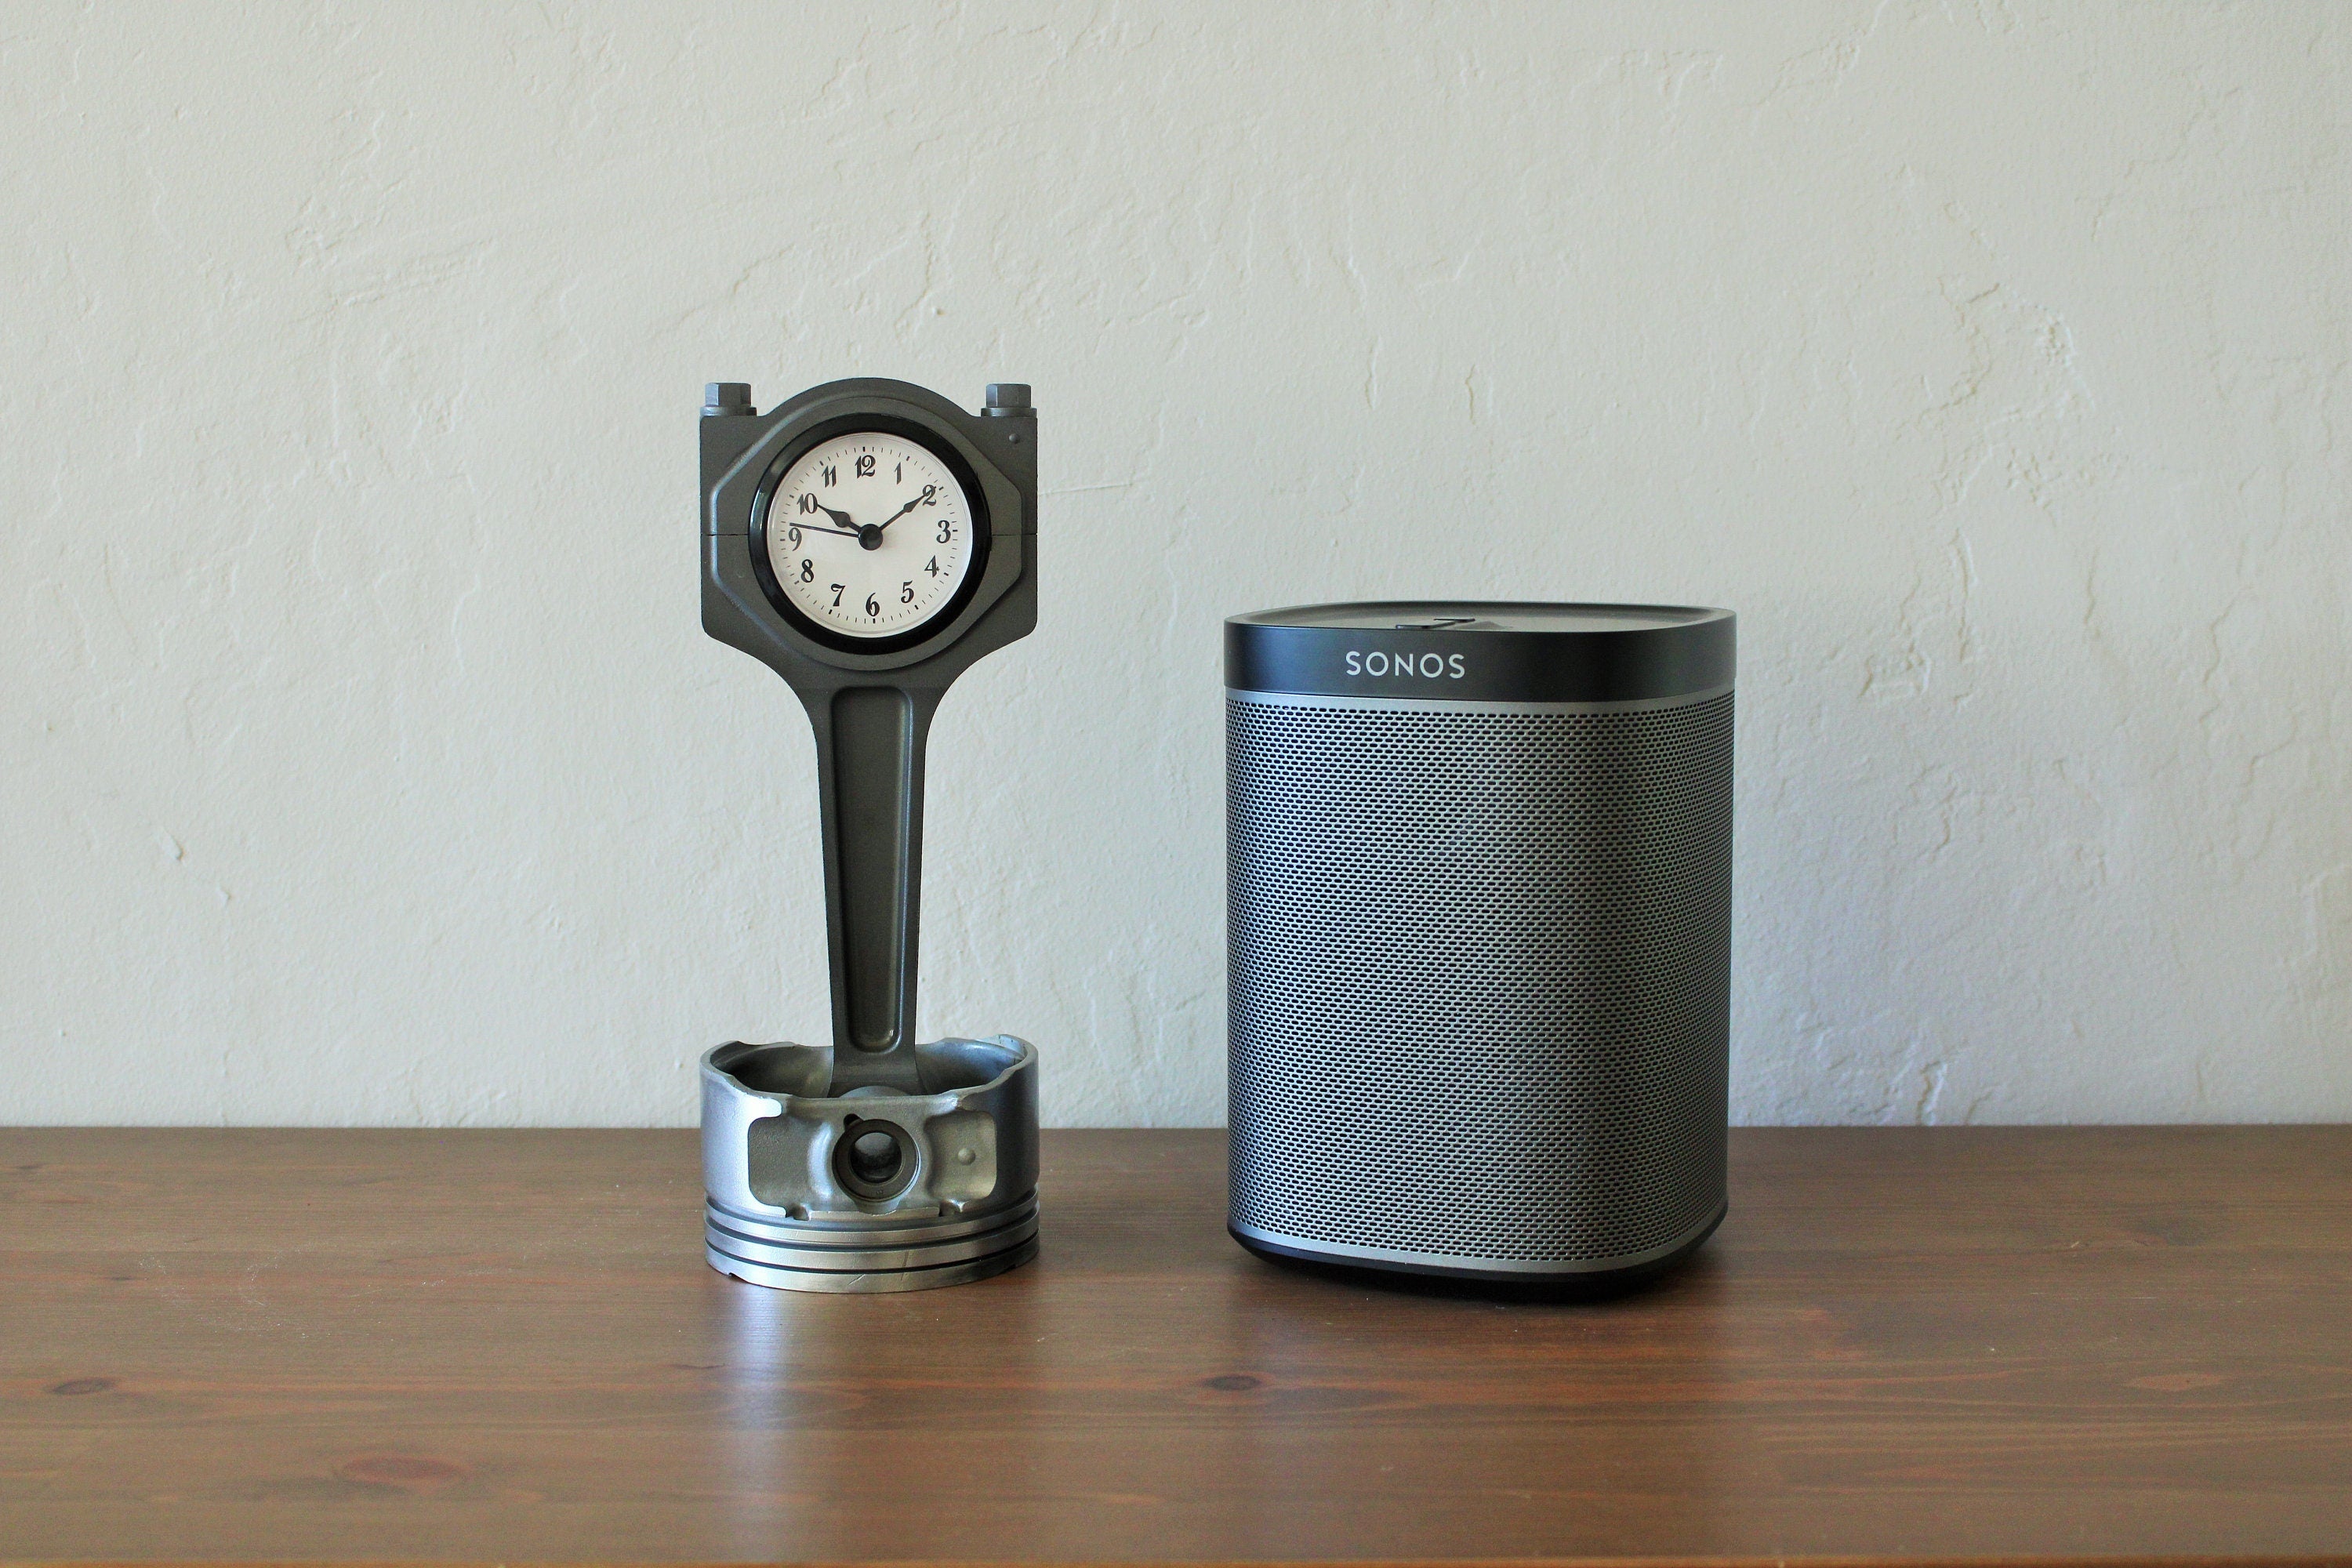 A piston clock made out of a Jaguar car's piston finished in gunmetal gray next to a speaker.